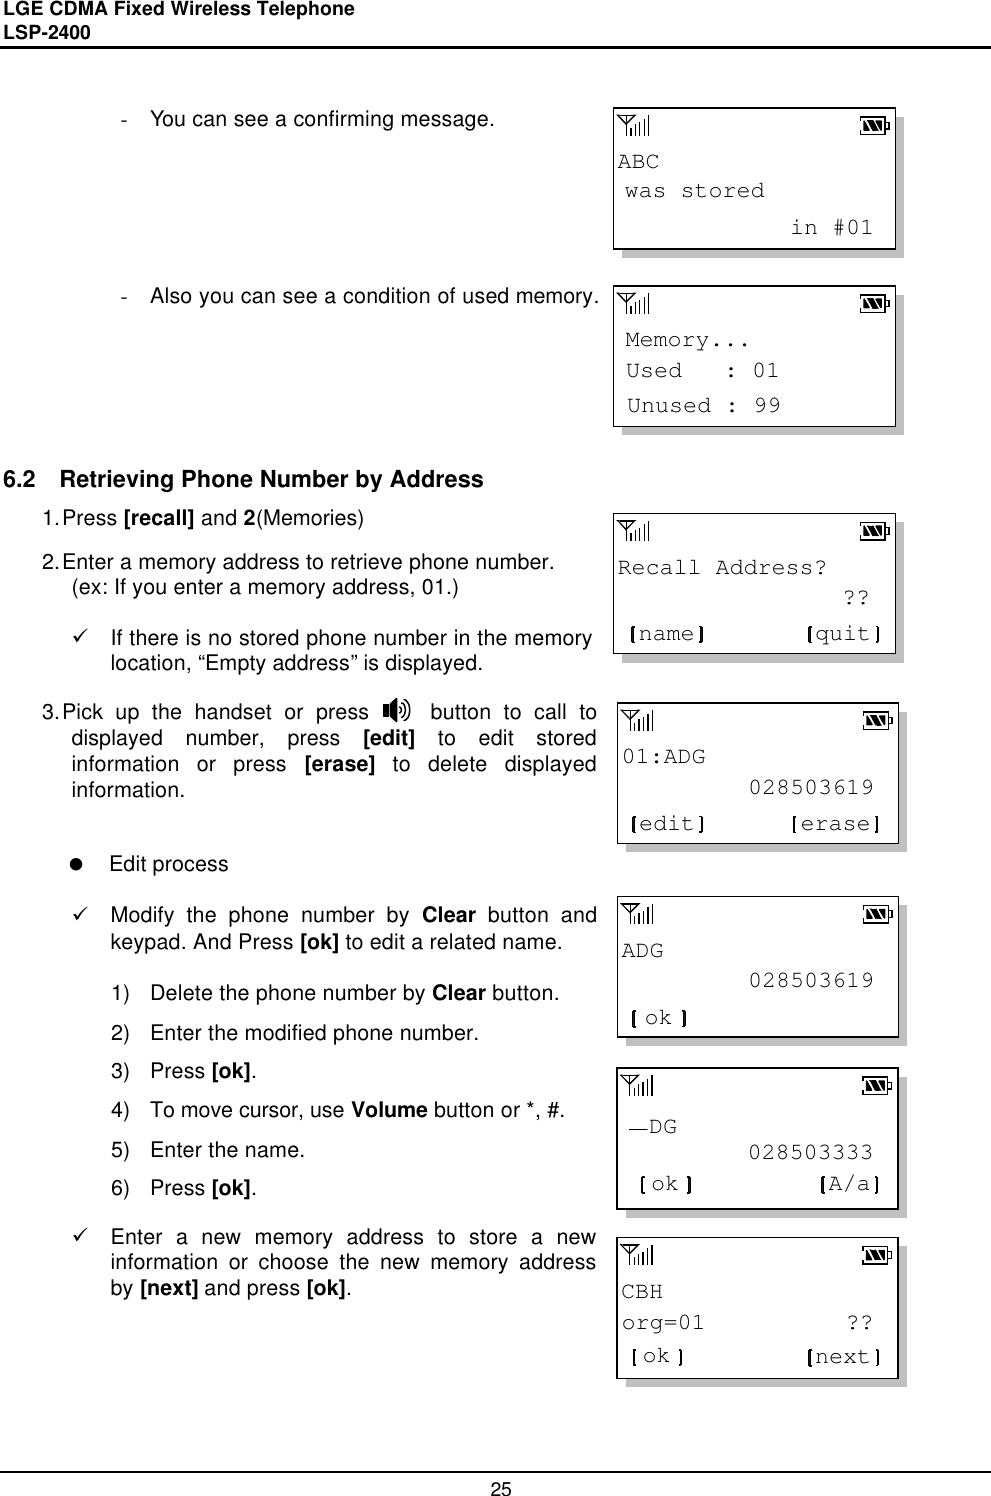 LGE CDMA Fixed Wireless Telephone                                       LSP-2400     25 ABCwas stored            in #01Memory...Unused : 99Used   : 01Recall Address?                ??quitname01:ADG         028503619eraseeditADG         028503619ok         028503333  DGok A/aCBHorg=01          ??ok next - You can see a confirming message.       - Also you can see a condition of used memory.       6.2  Retrieving Phone Number by Address 1. Press [recall] and 2(Memories)  2. Enter a memory address to retrieve phone number. (ex: If you enter a memory address, 01.)  ü If there is no stored phone number in the memory location, “Empty address” is displayed.  3. Pick up the handset or press     button to call to displayed number, press [edit] to edit stored information or press [erase] to delete displayed information.    l Edit process  ü Modify the phone number by Clear button and keypad. And Press [ok] to edit a related name.  1) Delete the phone number by Clear button. 2) Enter the modified phone number. 3) Press [ok]. 4) To move cursor, use Volume button or *, #.  5) Enter the name.  6) Press [ok]. ü Enter a new memory address to store a new information or choose the new memory address by [next] and press [ok].        